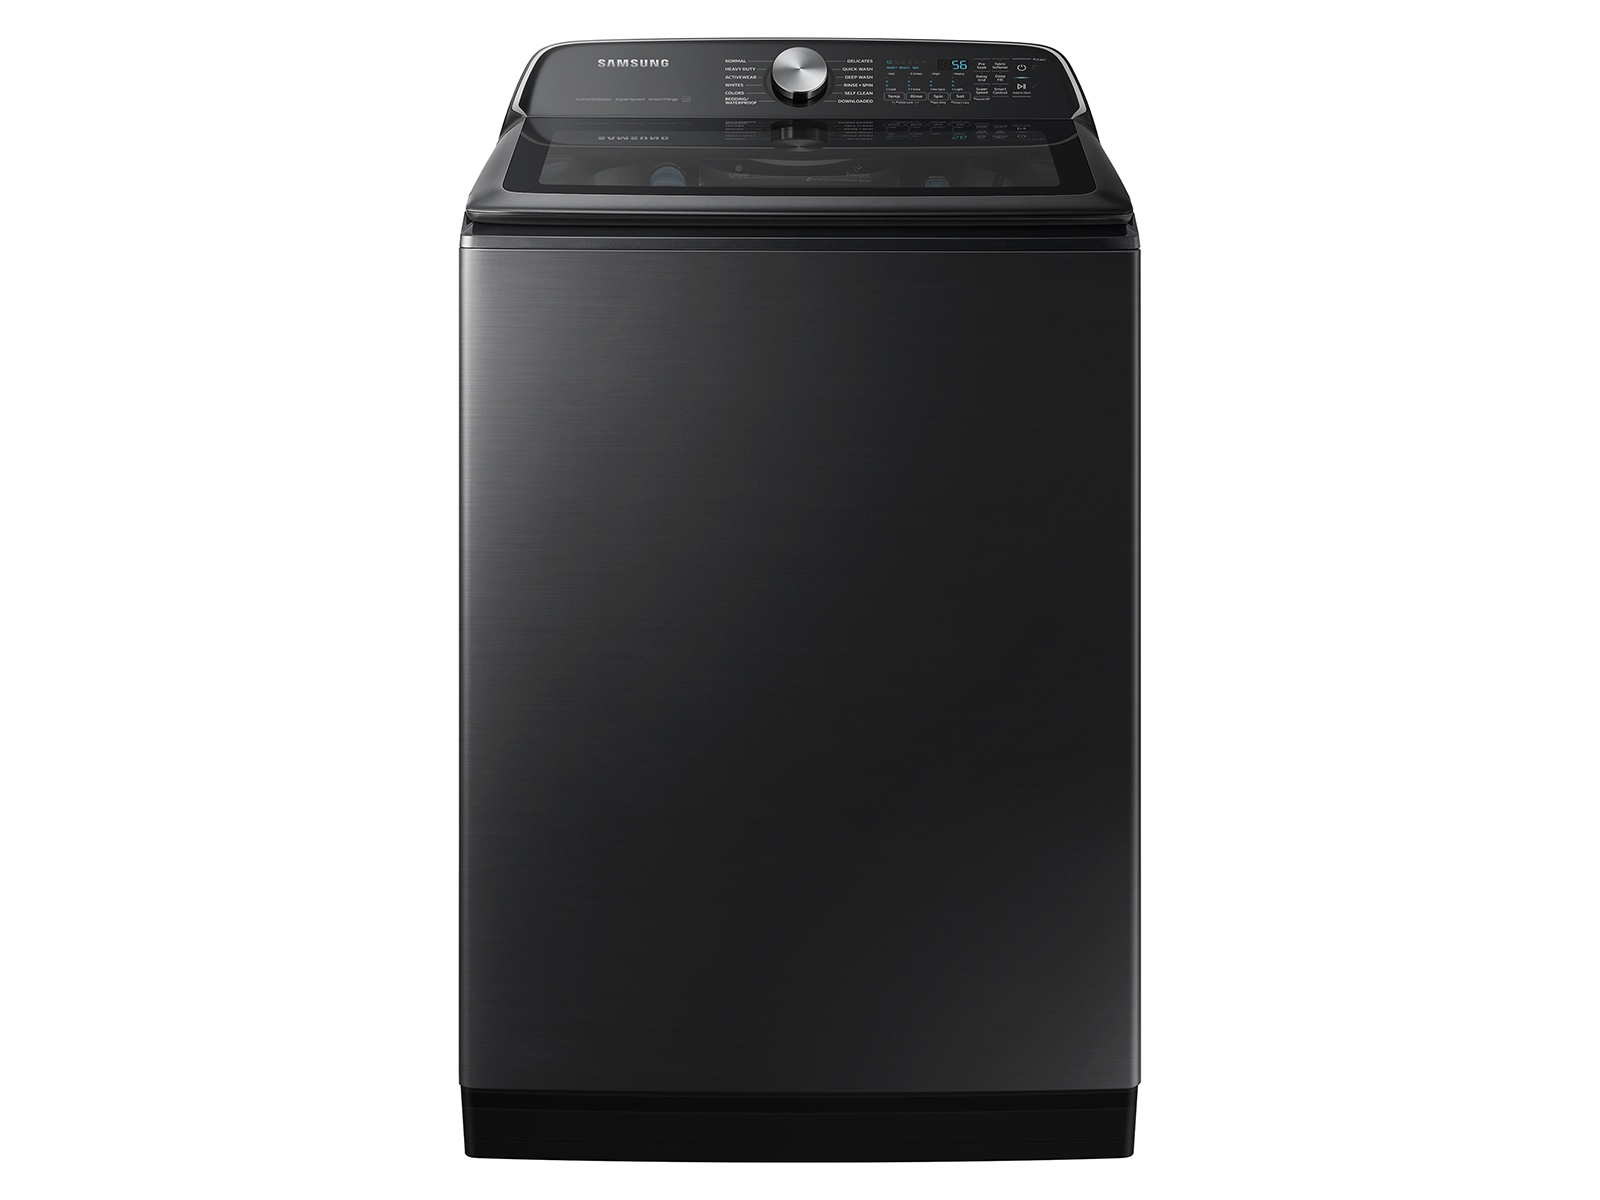 Samsung 5.5 cu. ft. Extra-Large Capacity Smart Top Load Washer with Super Speed Wash in Brushed Black(WA55CG7100AVUS)